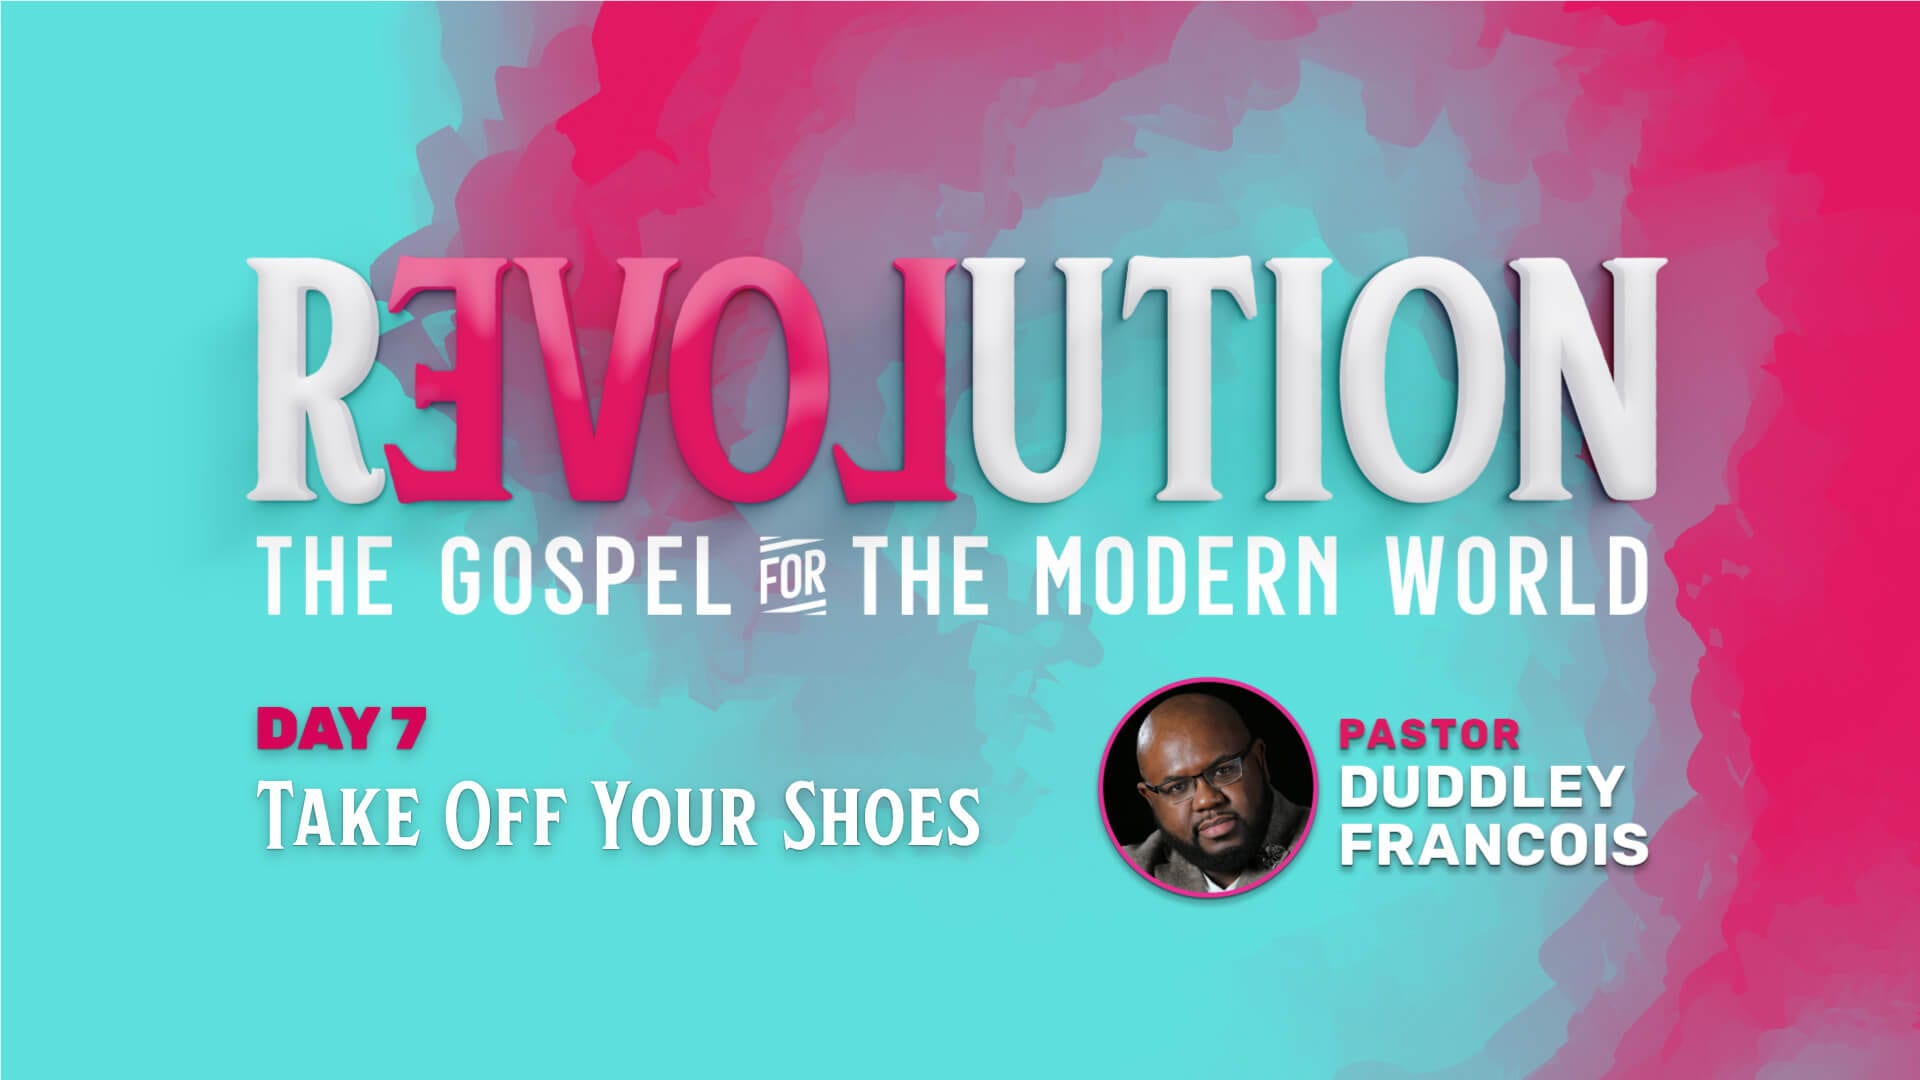 rEVOLution - Day 7 - Take Off Your Shoes - Duddley Francois